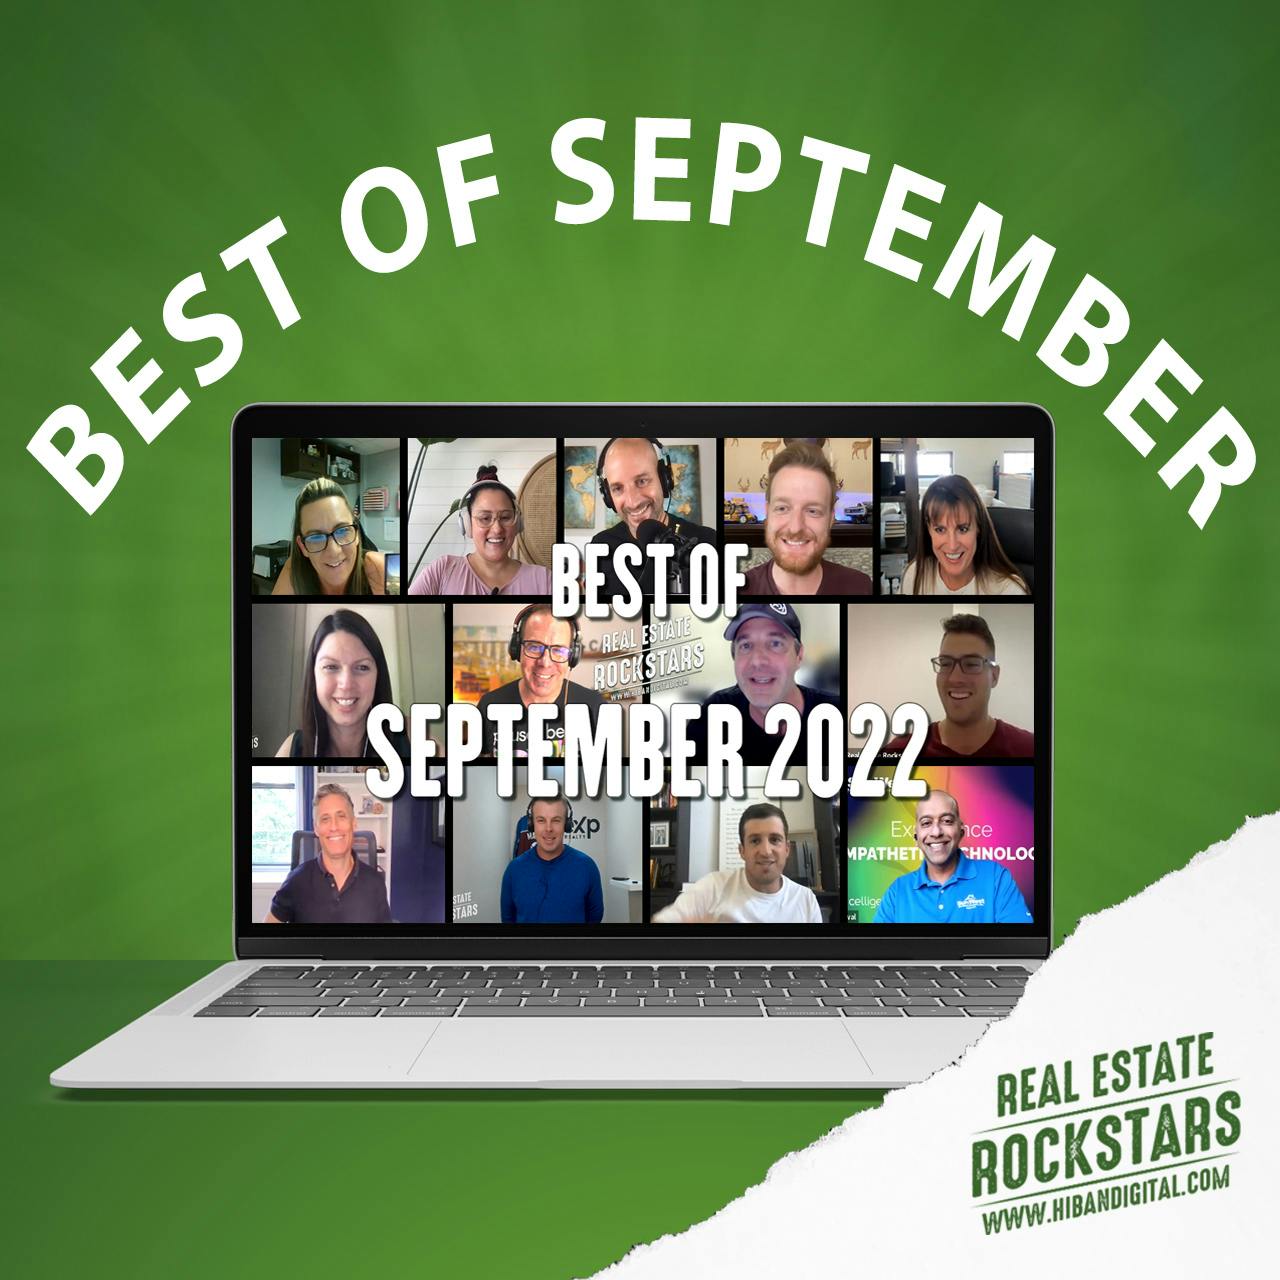 1085: RERR Highlights – The Best Real Estate Podcast Clips of September 2022